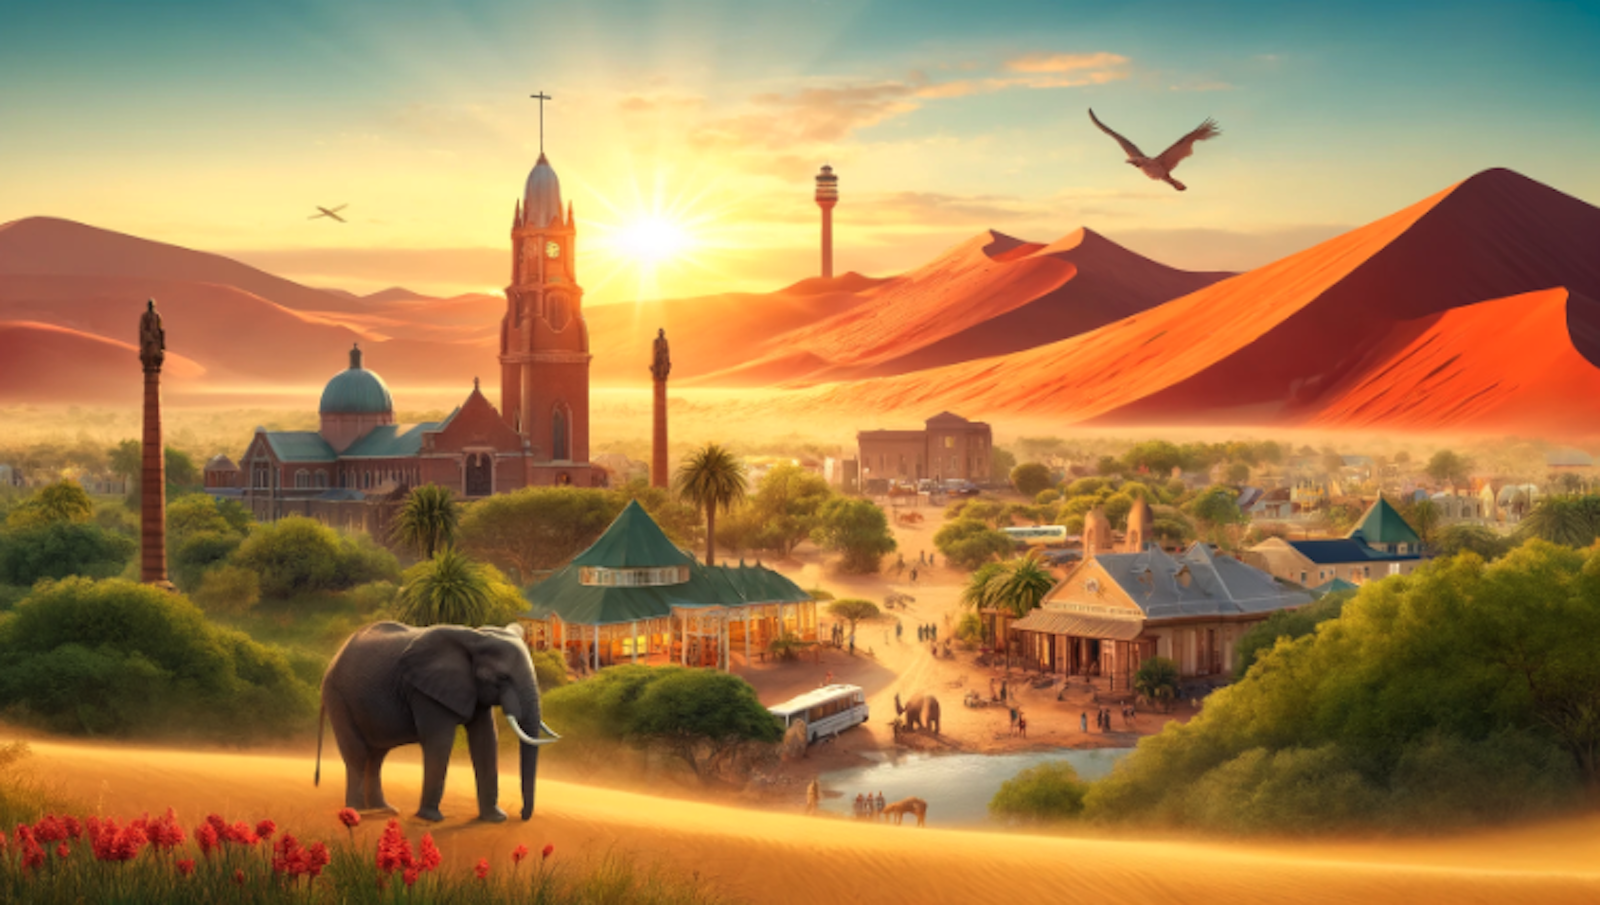 Photorealistic landscape image of Namibia's hospitality and tourism industry, featuring landmarks like Christ Church and the Independence Memorial Museum in Windhoek, the red dunes of Sossusvlei, and elephants in Etosha National Park. The scene is set under a clear, golden sunset sky.